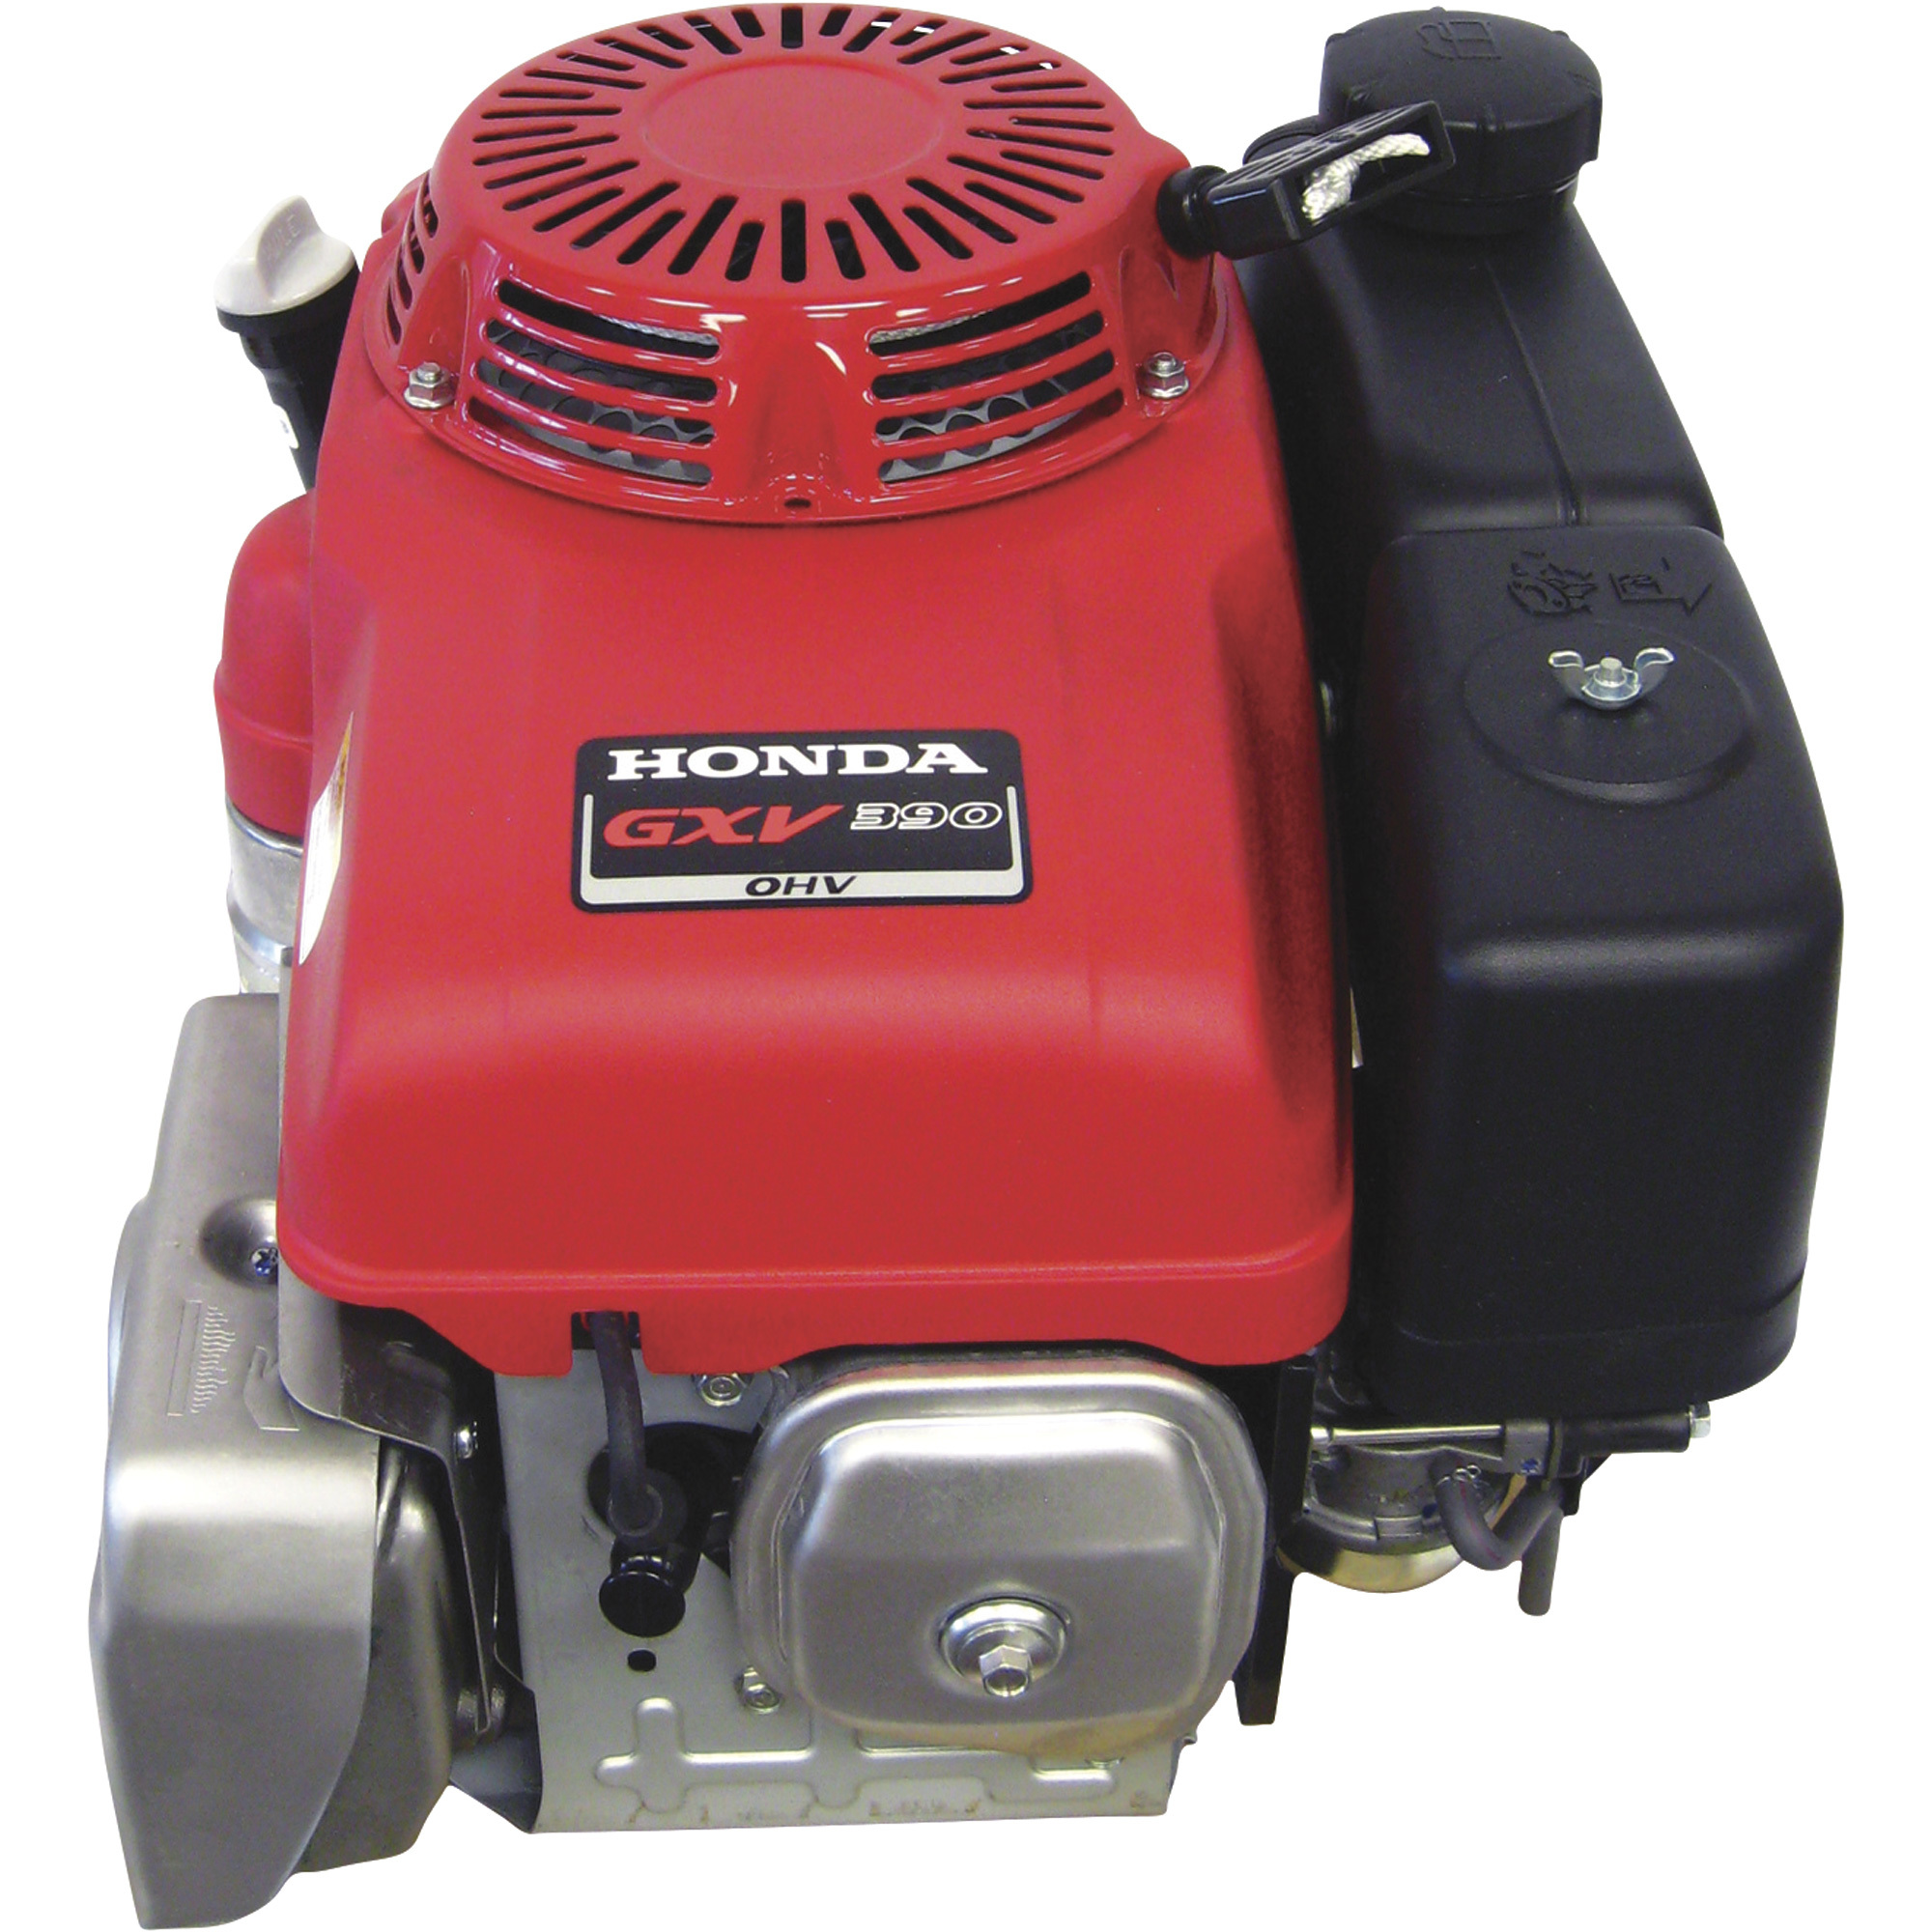 Honda Vertical OHV Engine with Electric Start â 389cc, GXV Series, 1Inch x 3.11Inch Shaft, Model GXV390UT1DEX3